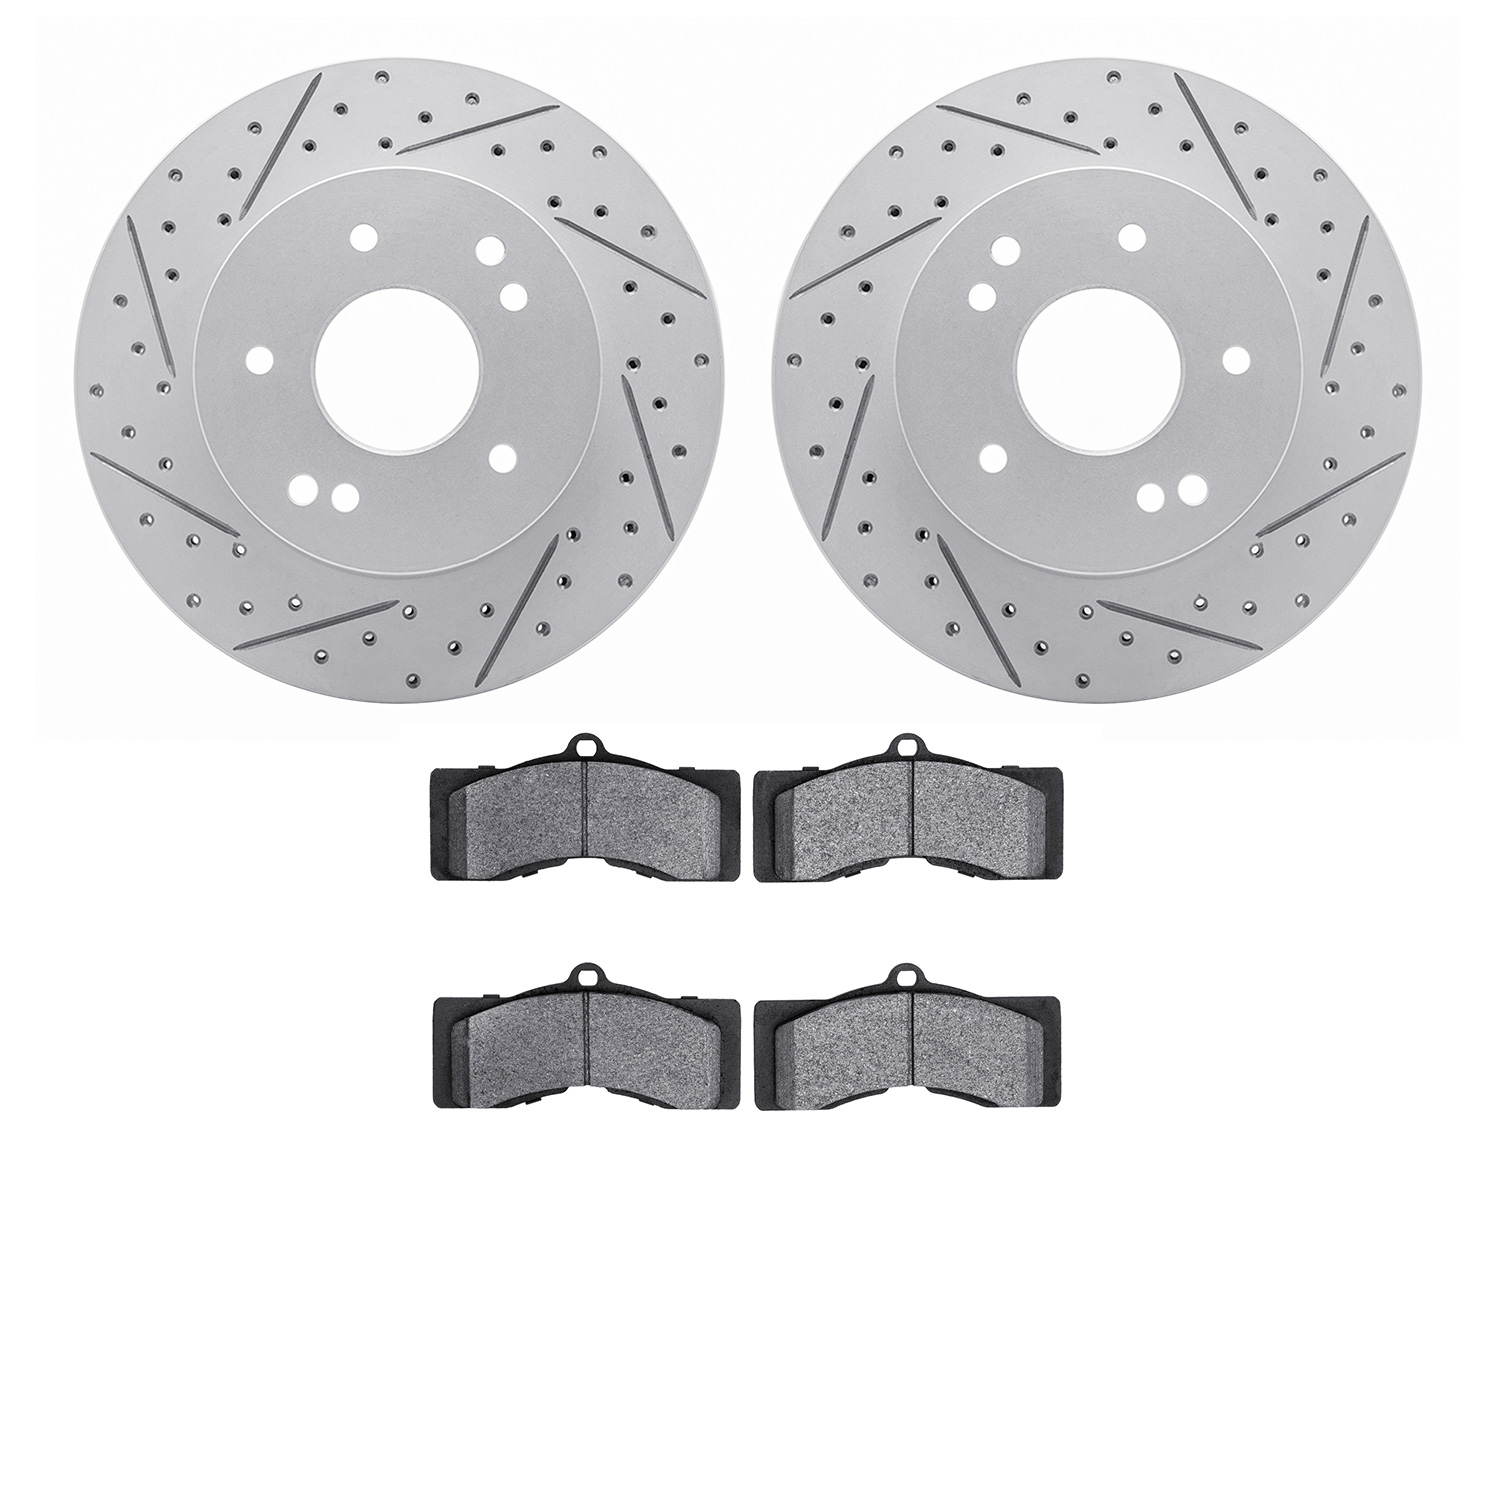 2202-47004 Geoperformance Drilled/Slotted Rotors w/Heavy-Duty Pads Kit, 1963-1982 GM, Position: Front, Rear